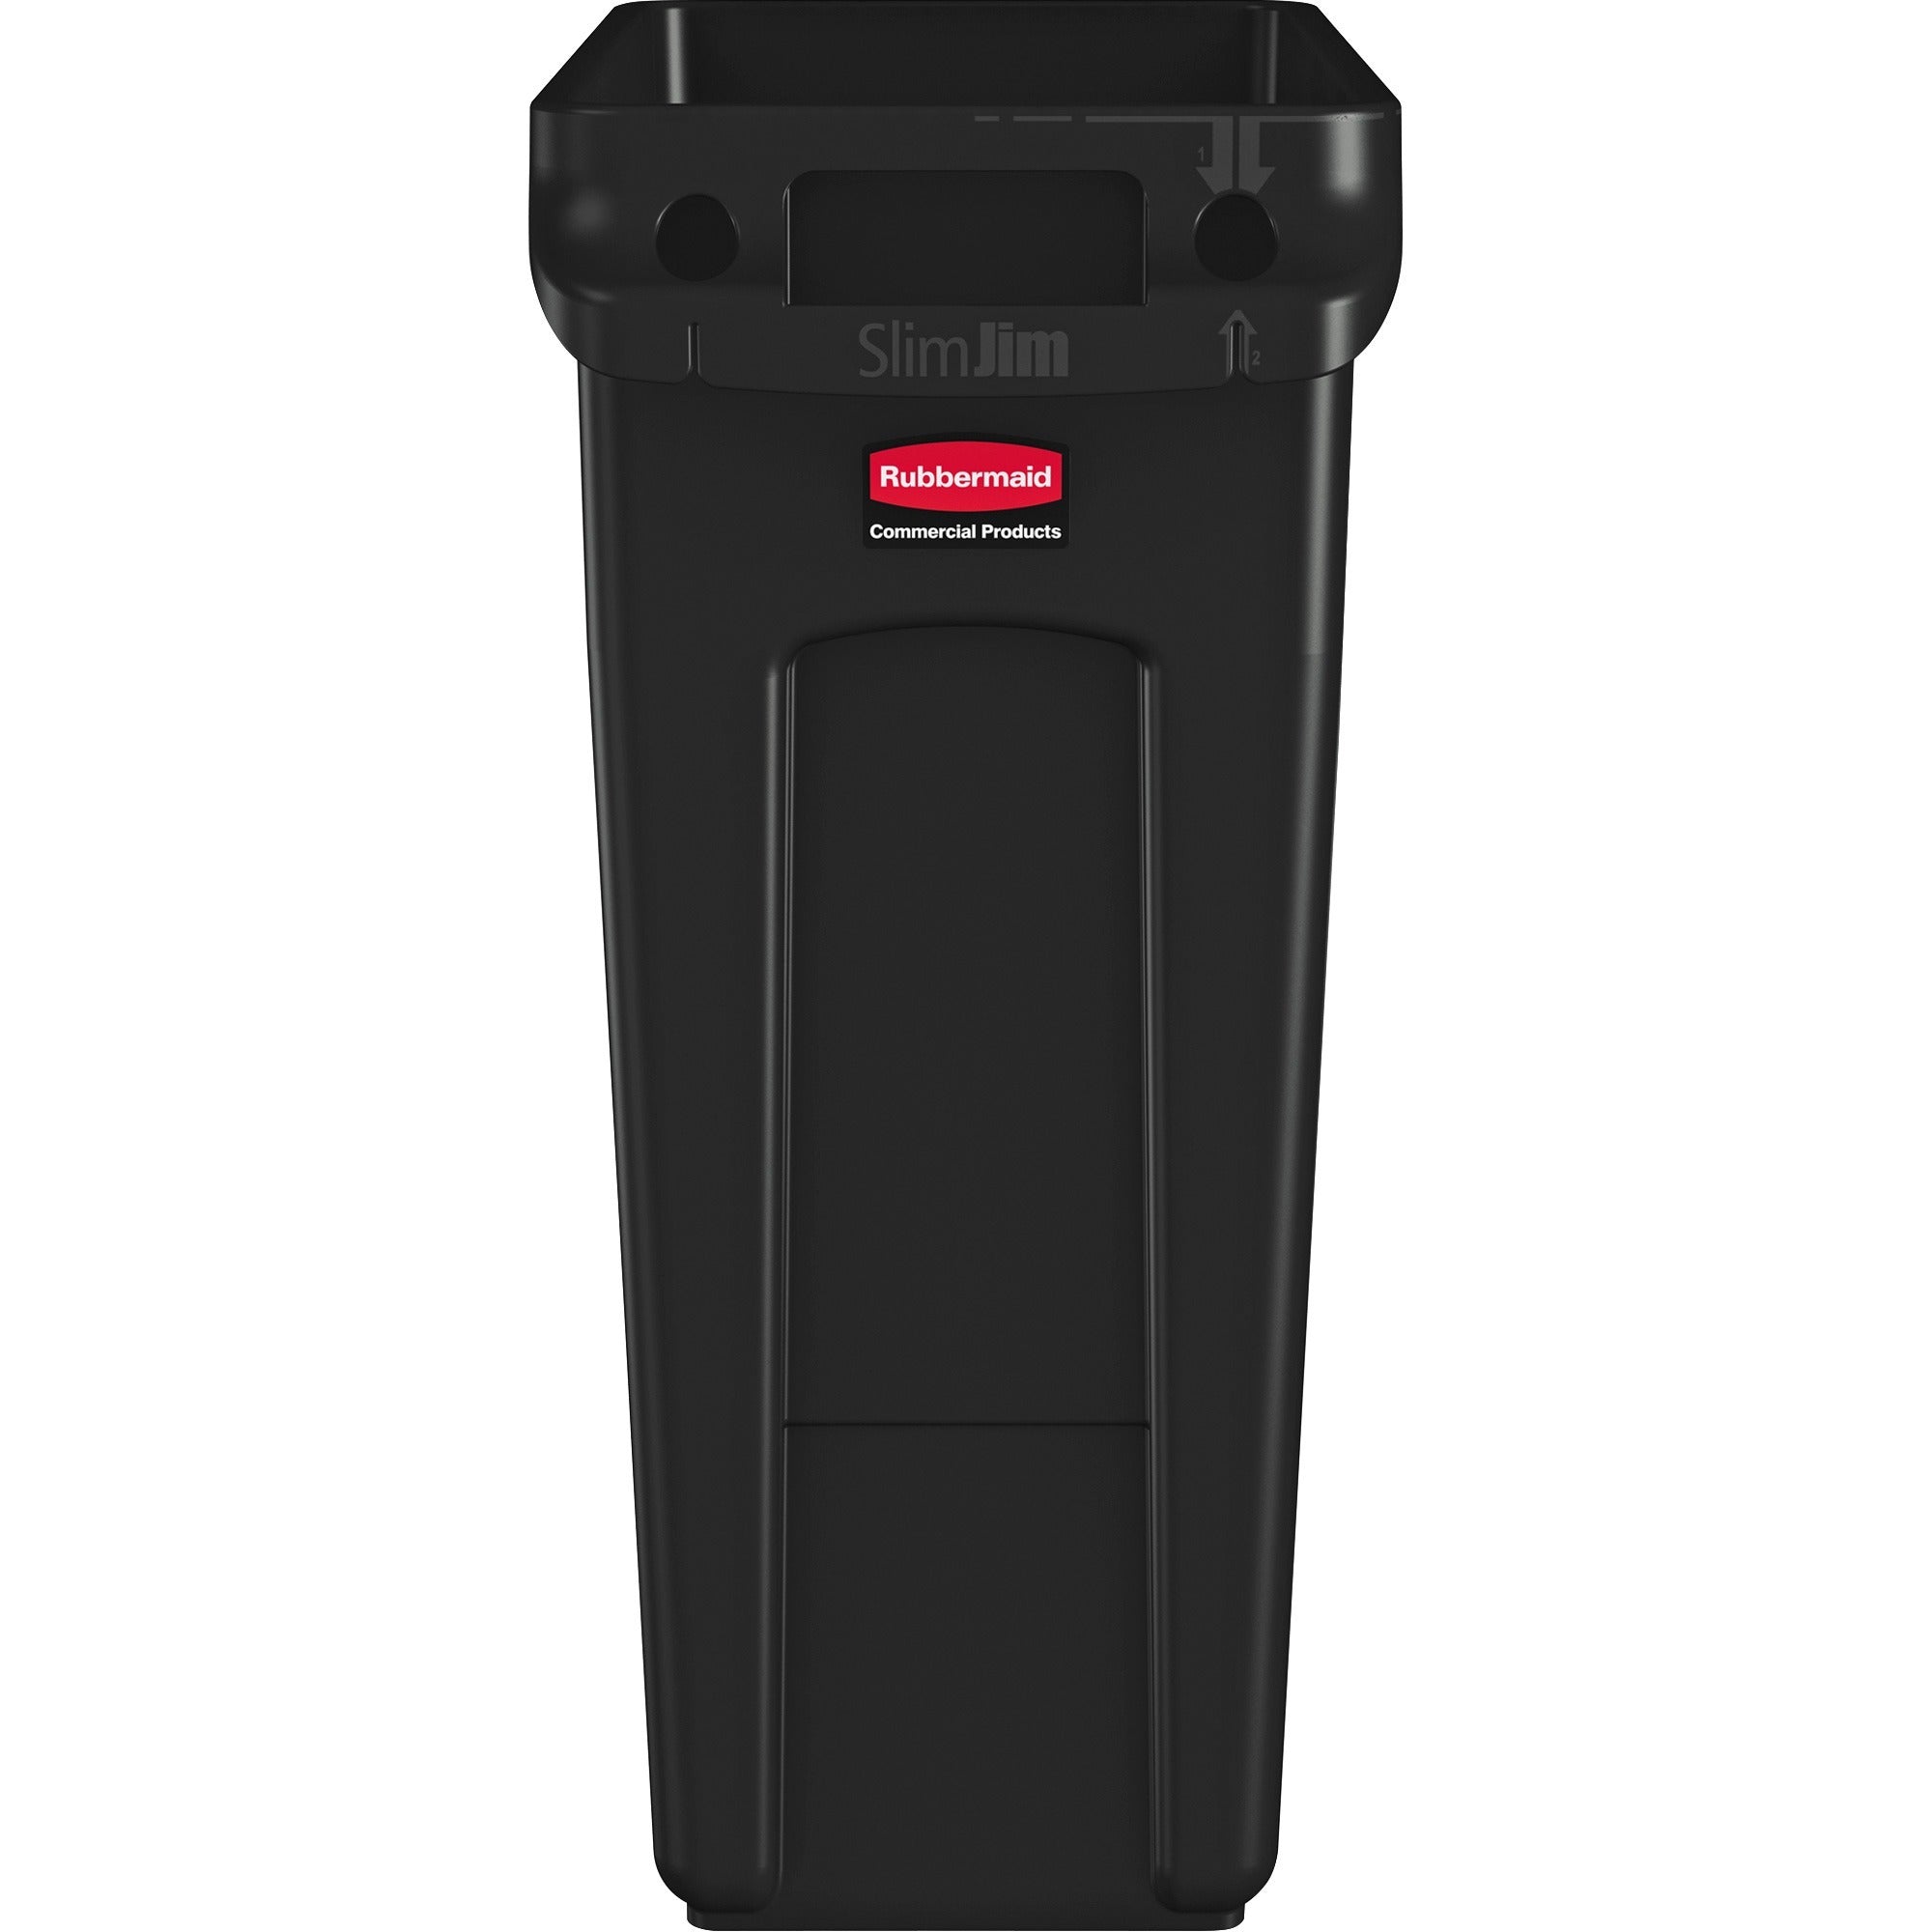 rubbermaid-commercial-slim-jim-16-gallon-vented-waste-containers-16-gal-capacity-rectangular-crush-resistant-durable-chemical-resistant-crush-resistant-recyclable-handle-25-height-x-11-width-x-22-depth-black-4-carton_rcp1955959ct - 2